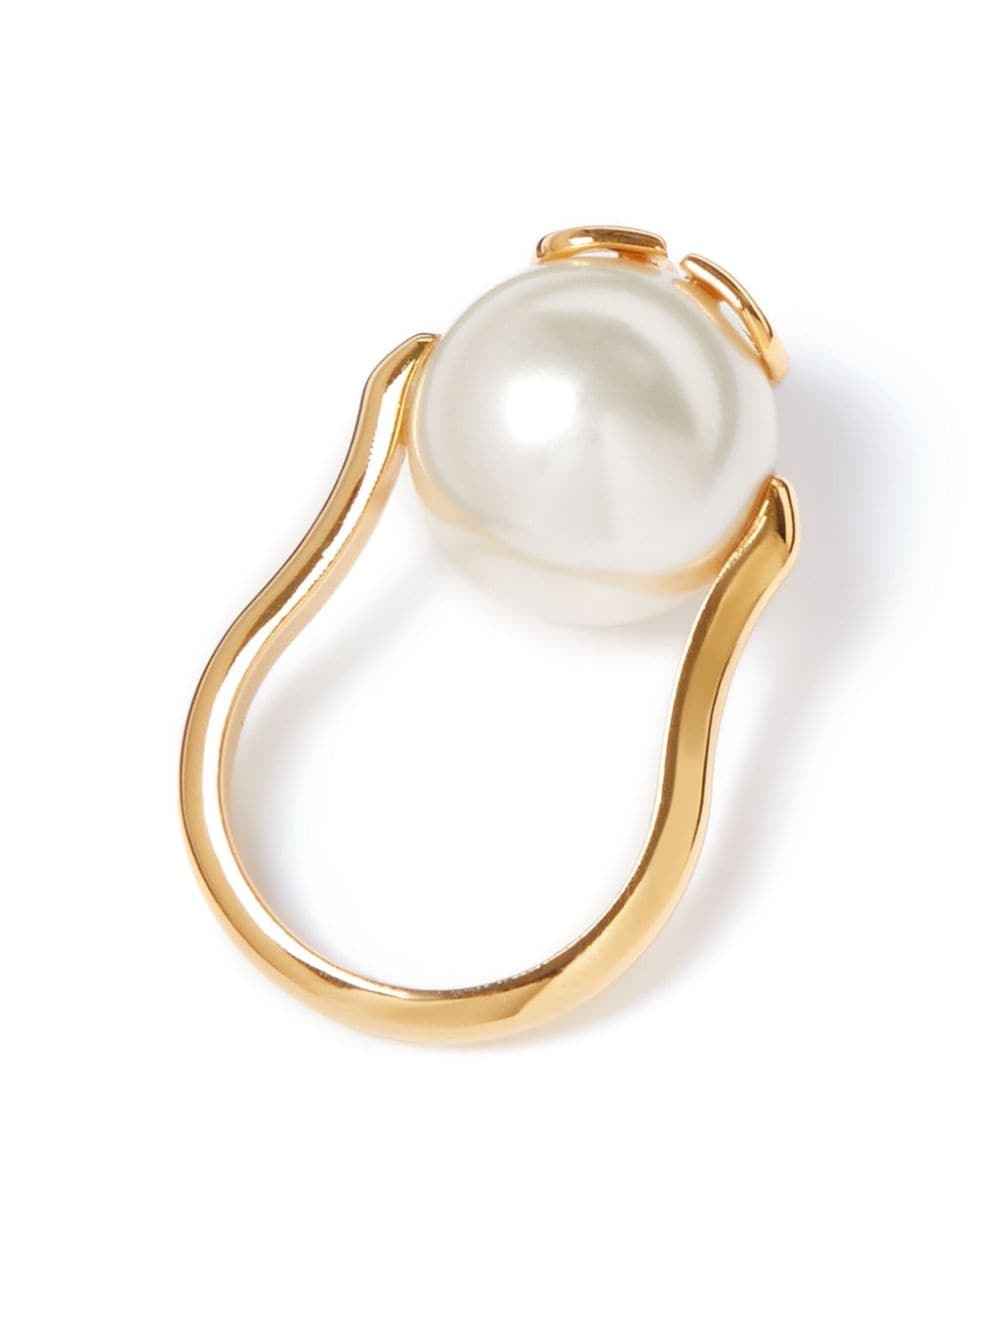 VLogo Signature faux-pearl ring - 3